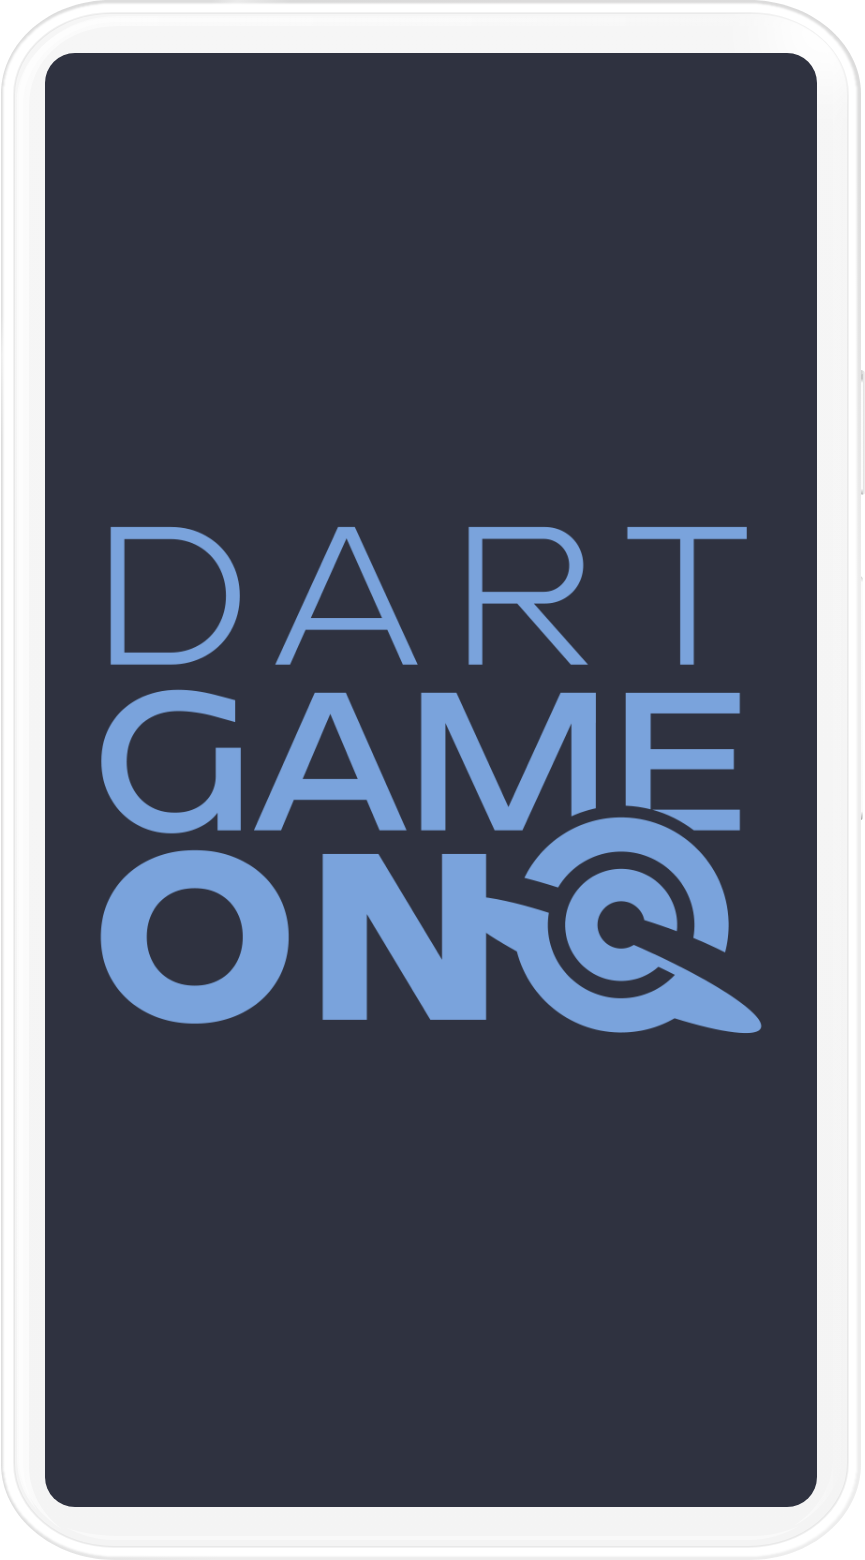 Start screen of the darts app for the client Interwetten